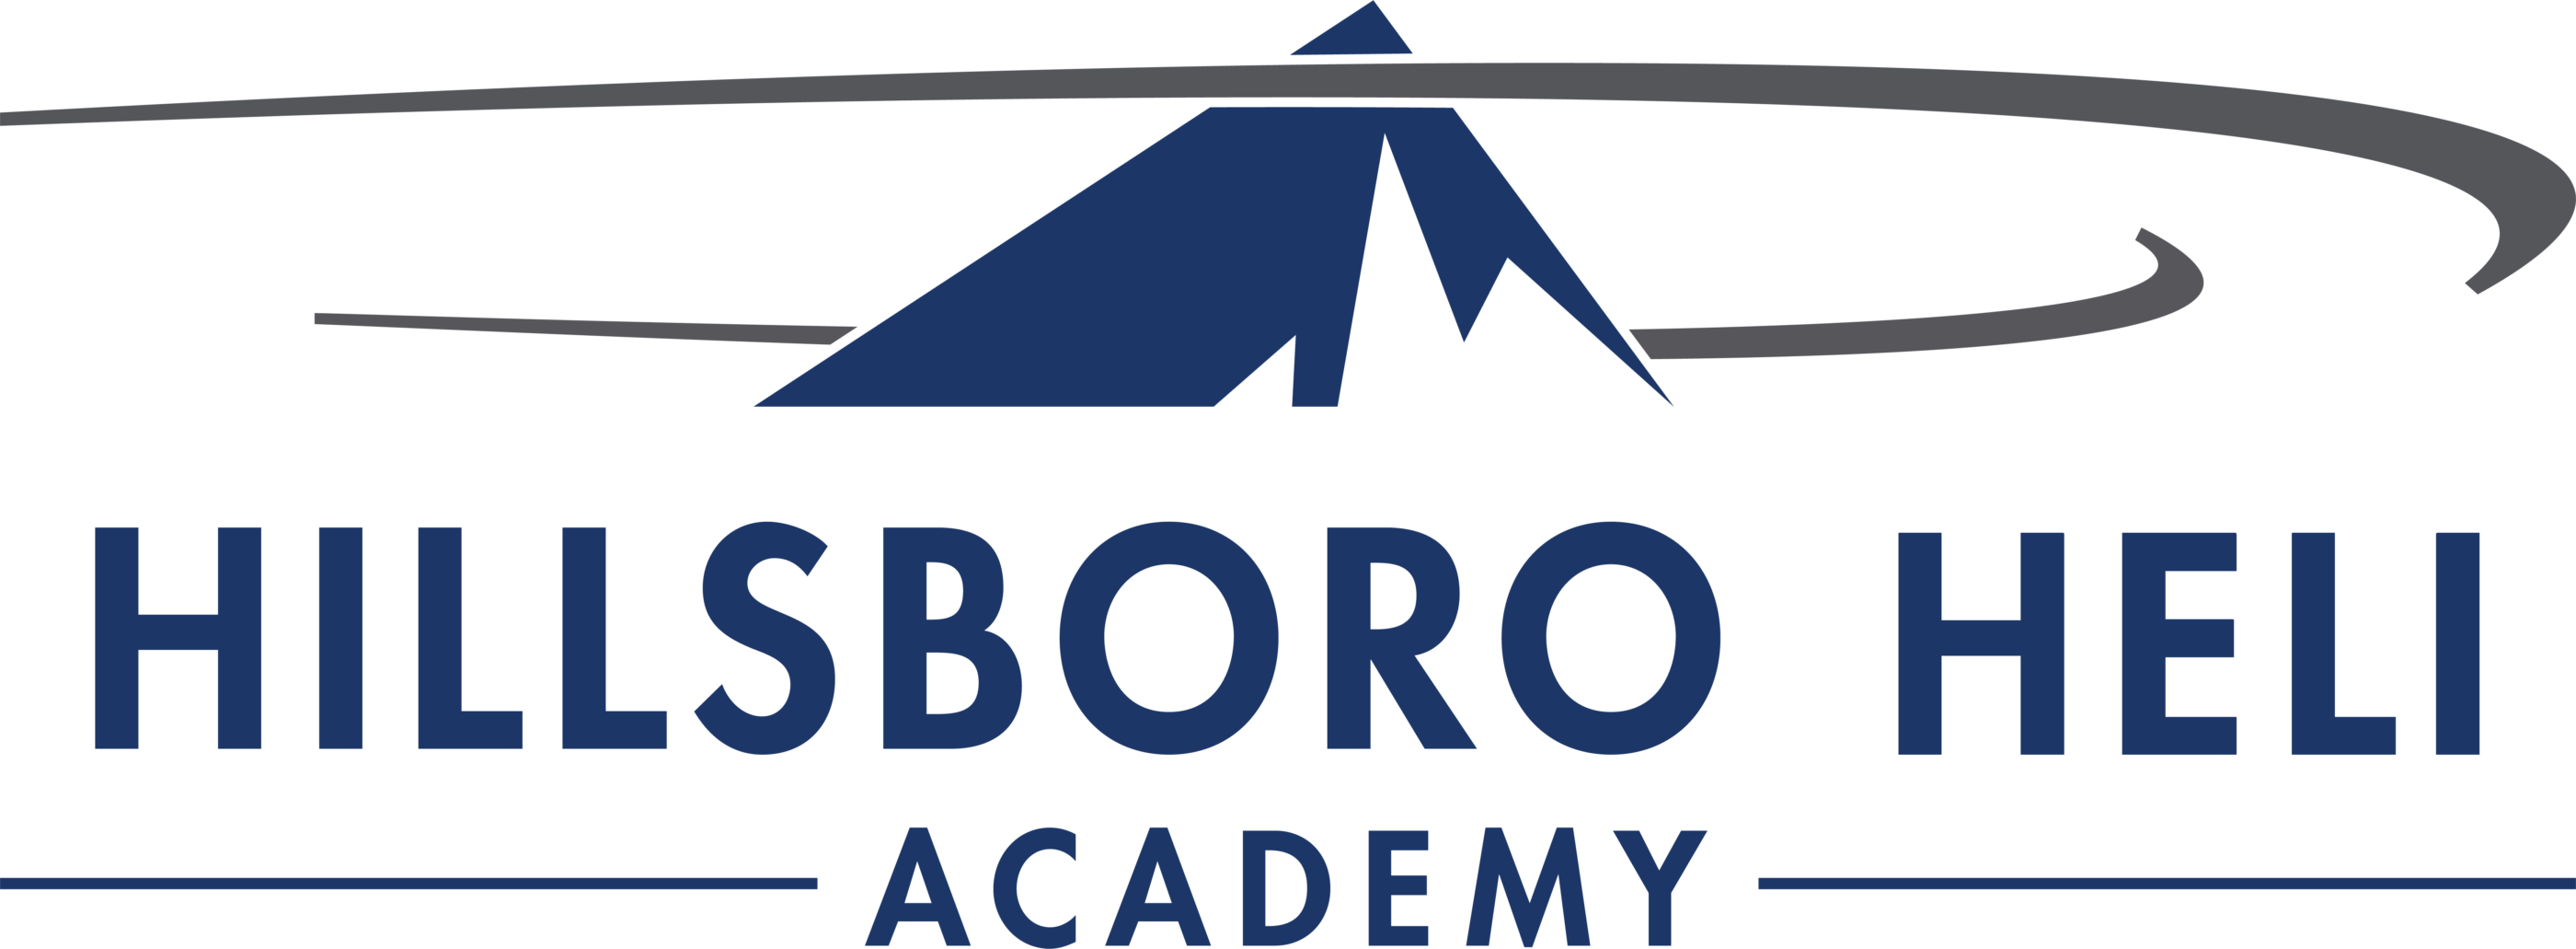 Hillsboro Heli Academy Partners With Bristow On New Career Pathway - Vertical Mag